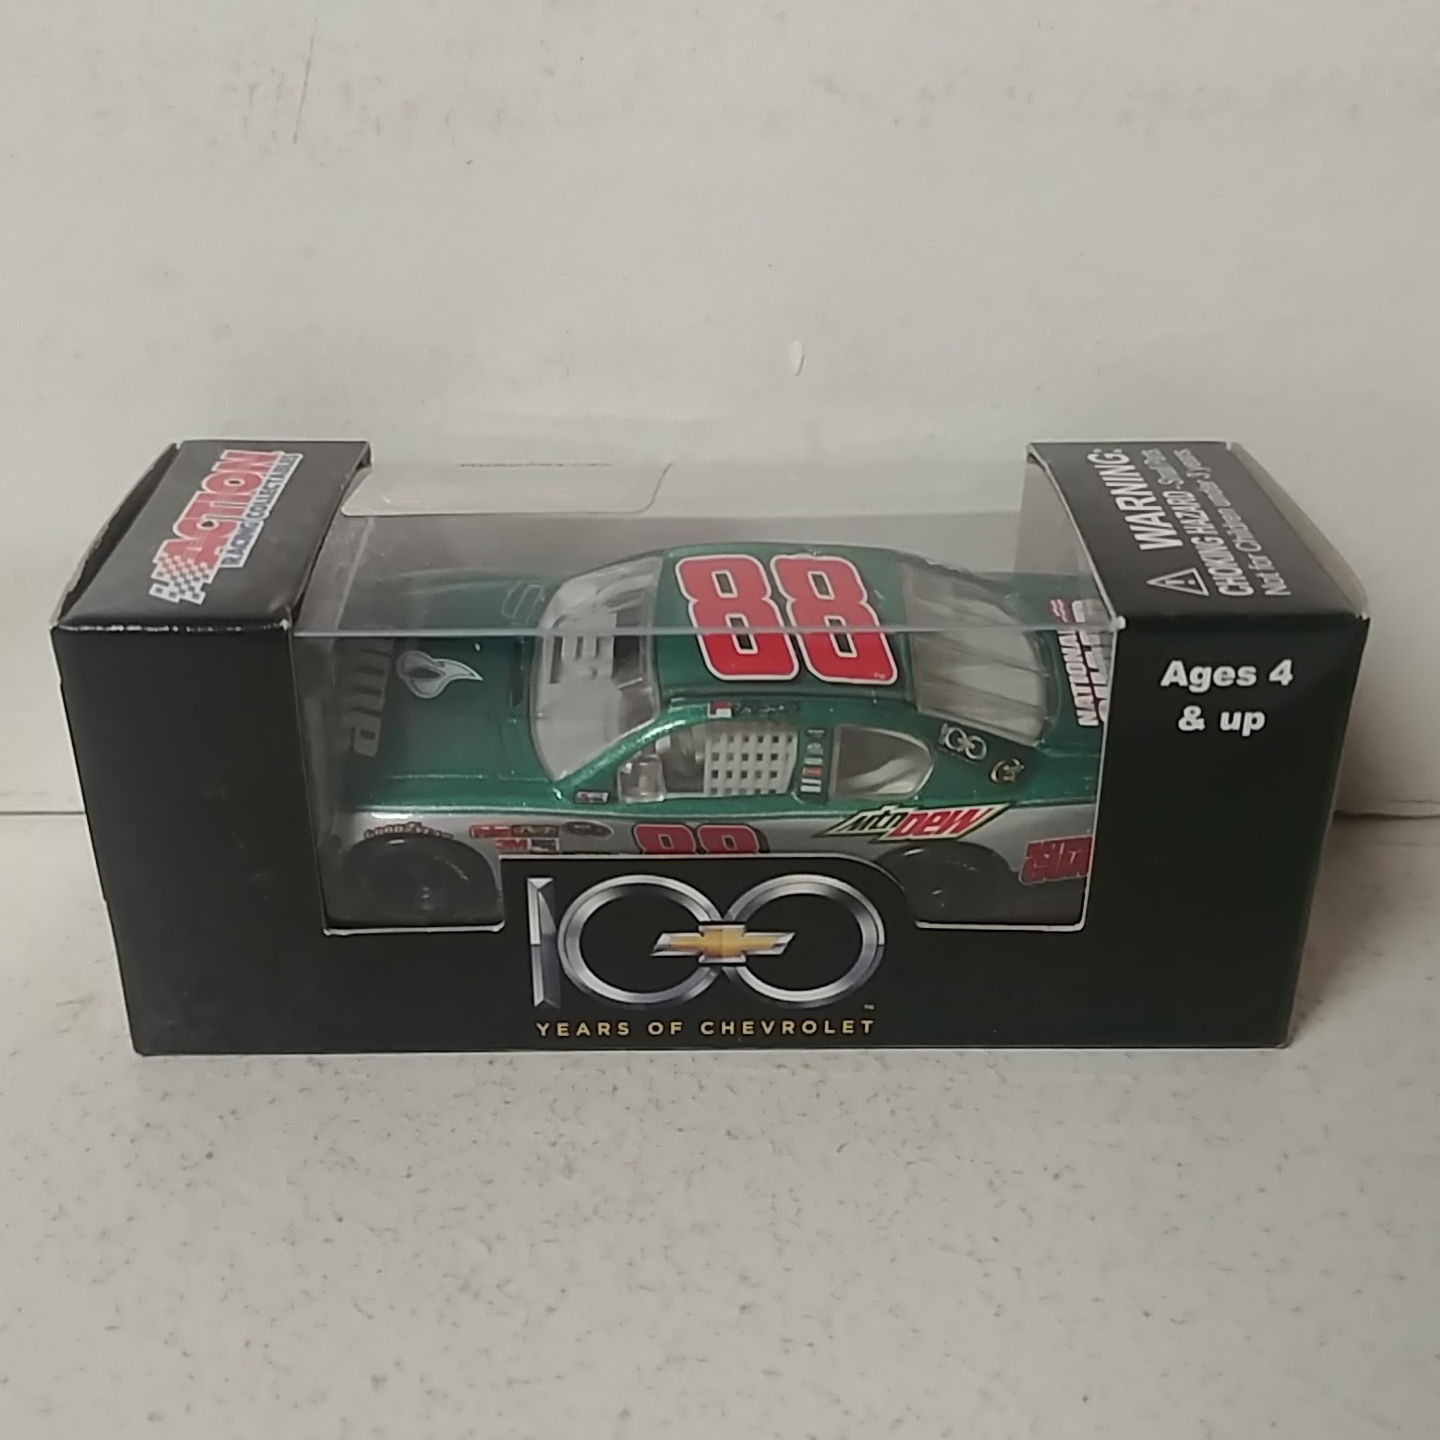 2011 Dale Earnhardt Jr 1/64th AMP "100 Years of Chevrolet" Pitstop Series Impala